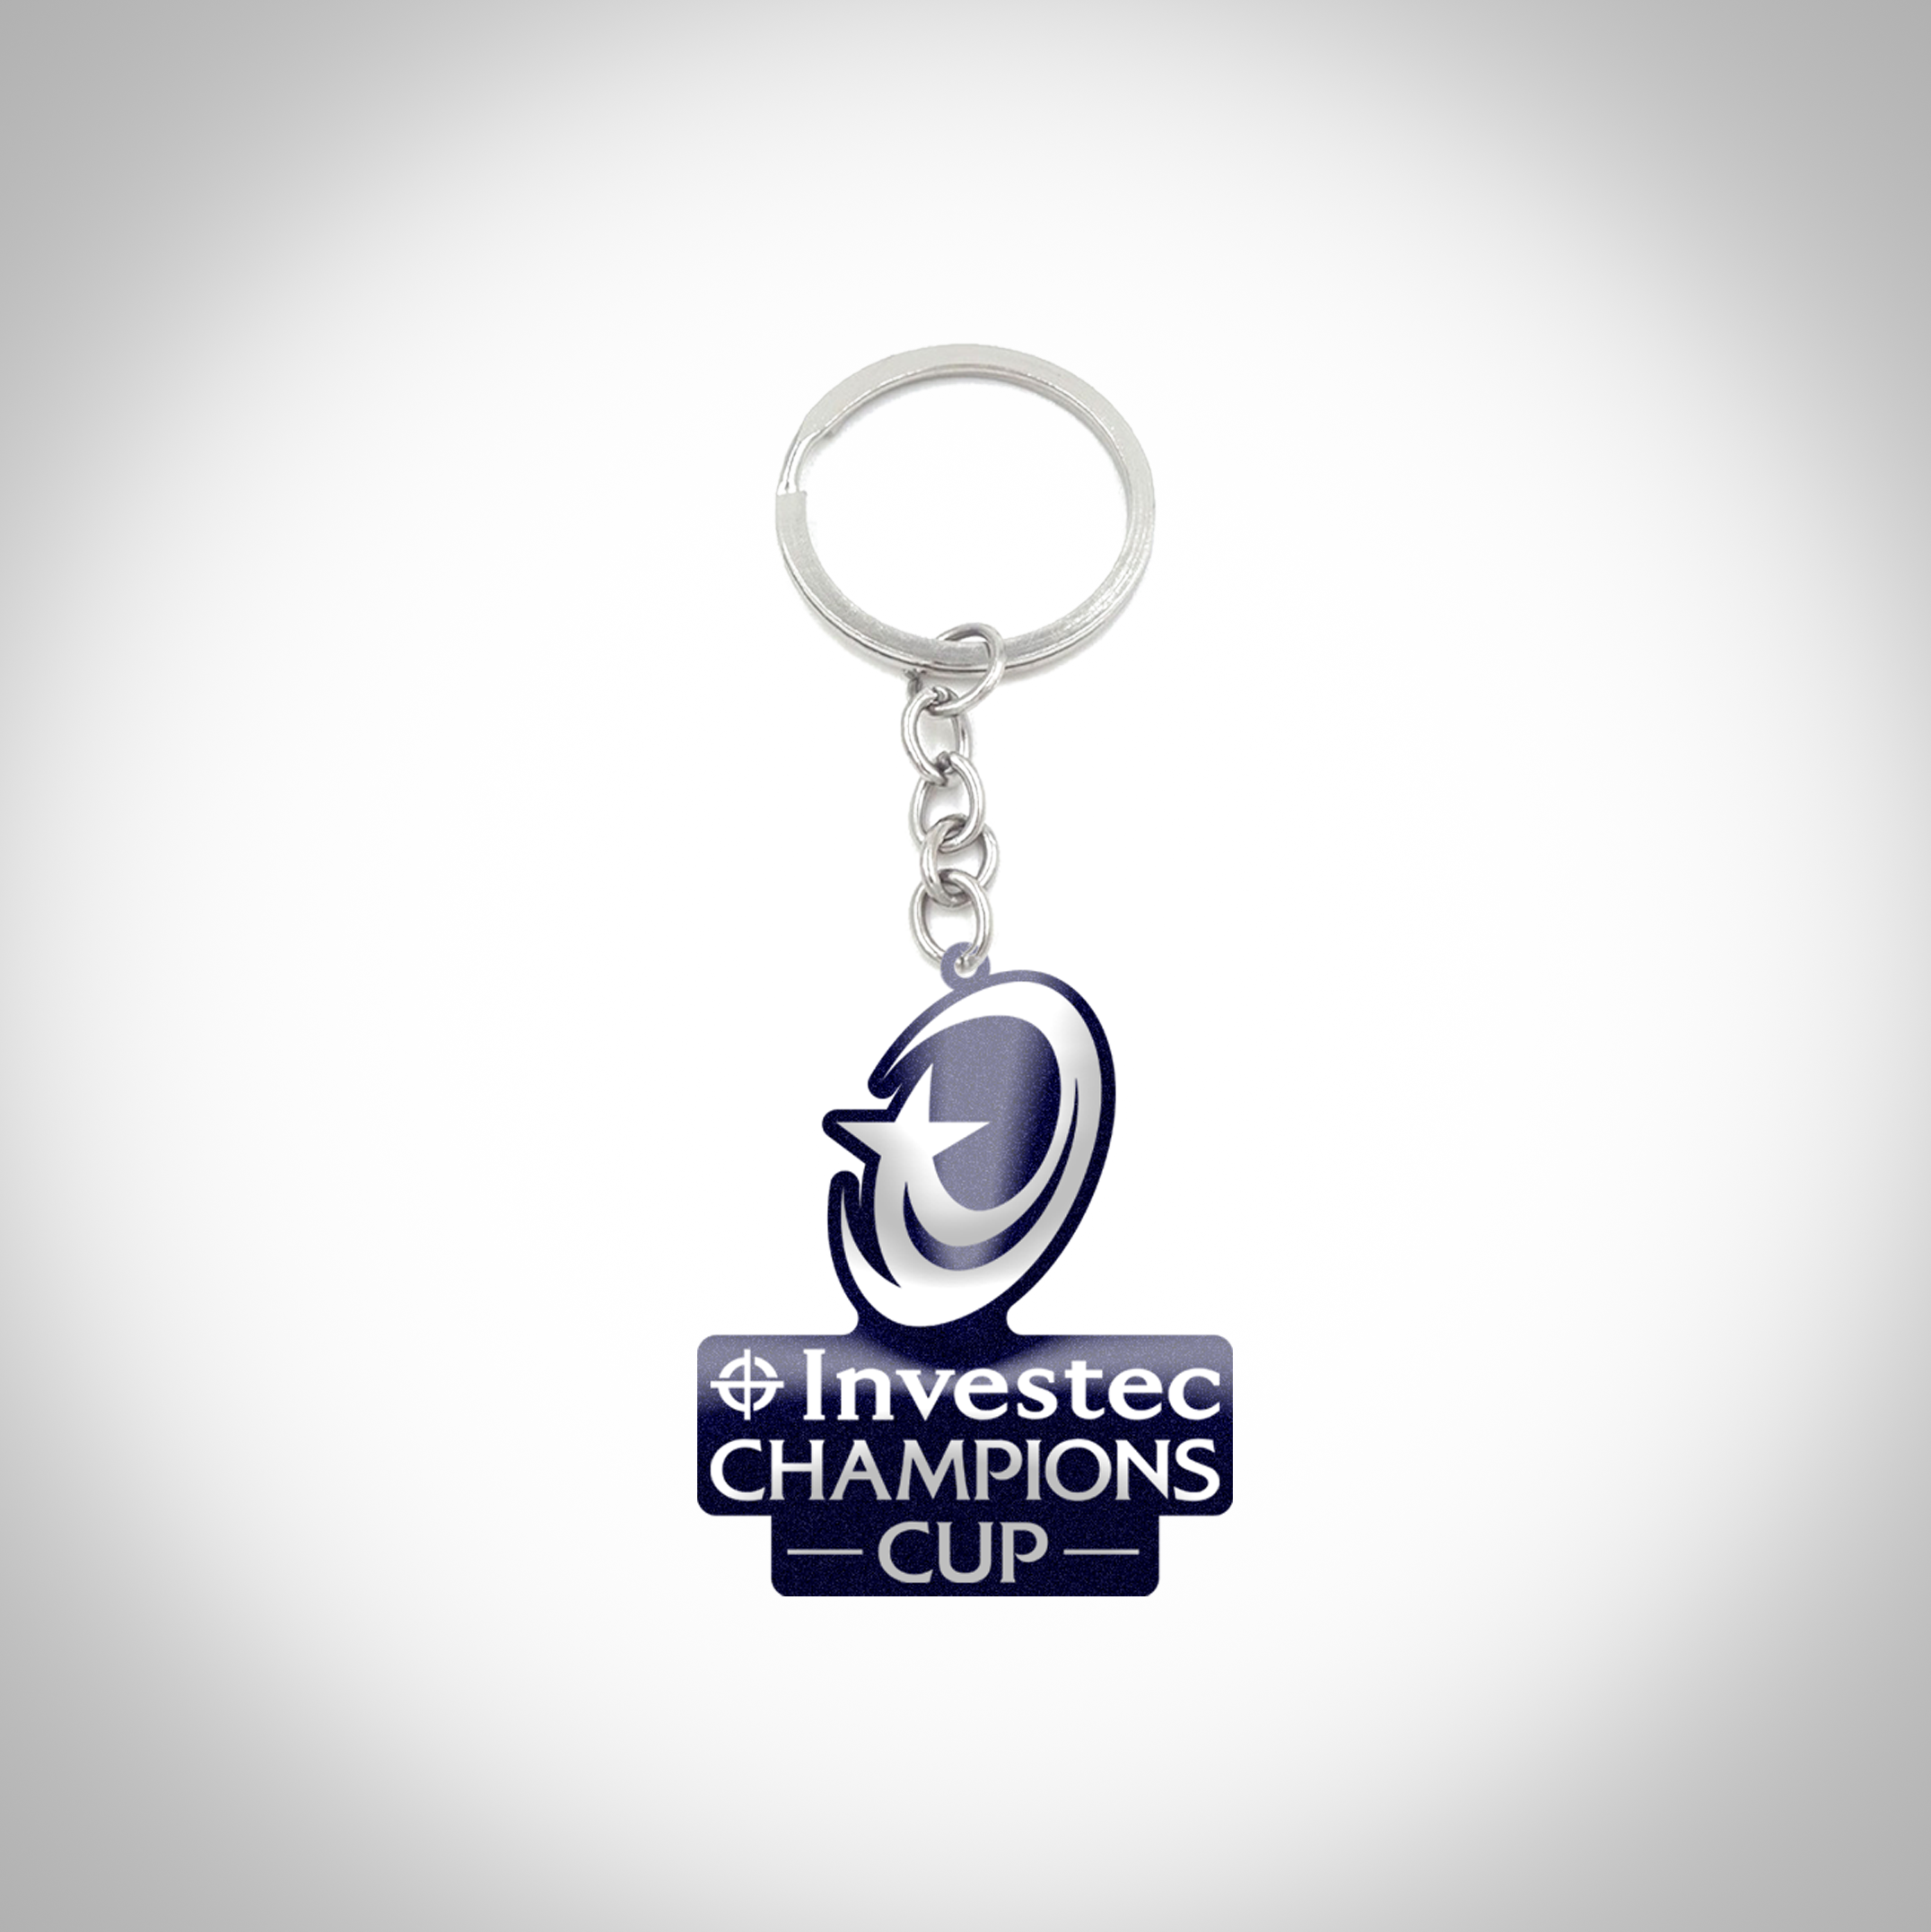 Investec Champions Cup Keyring